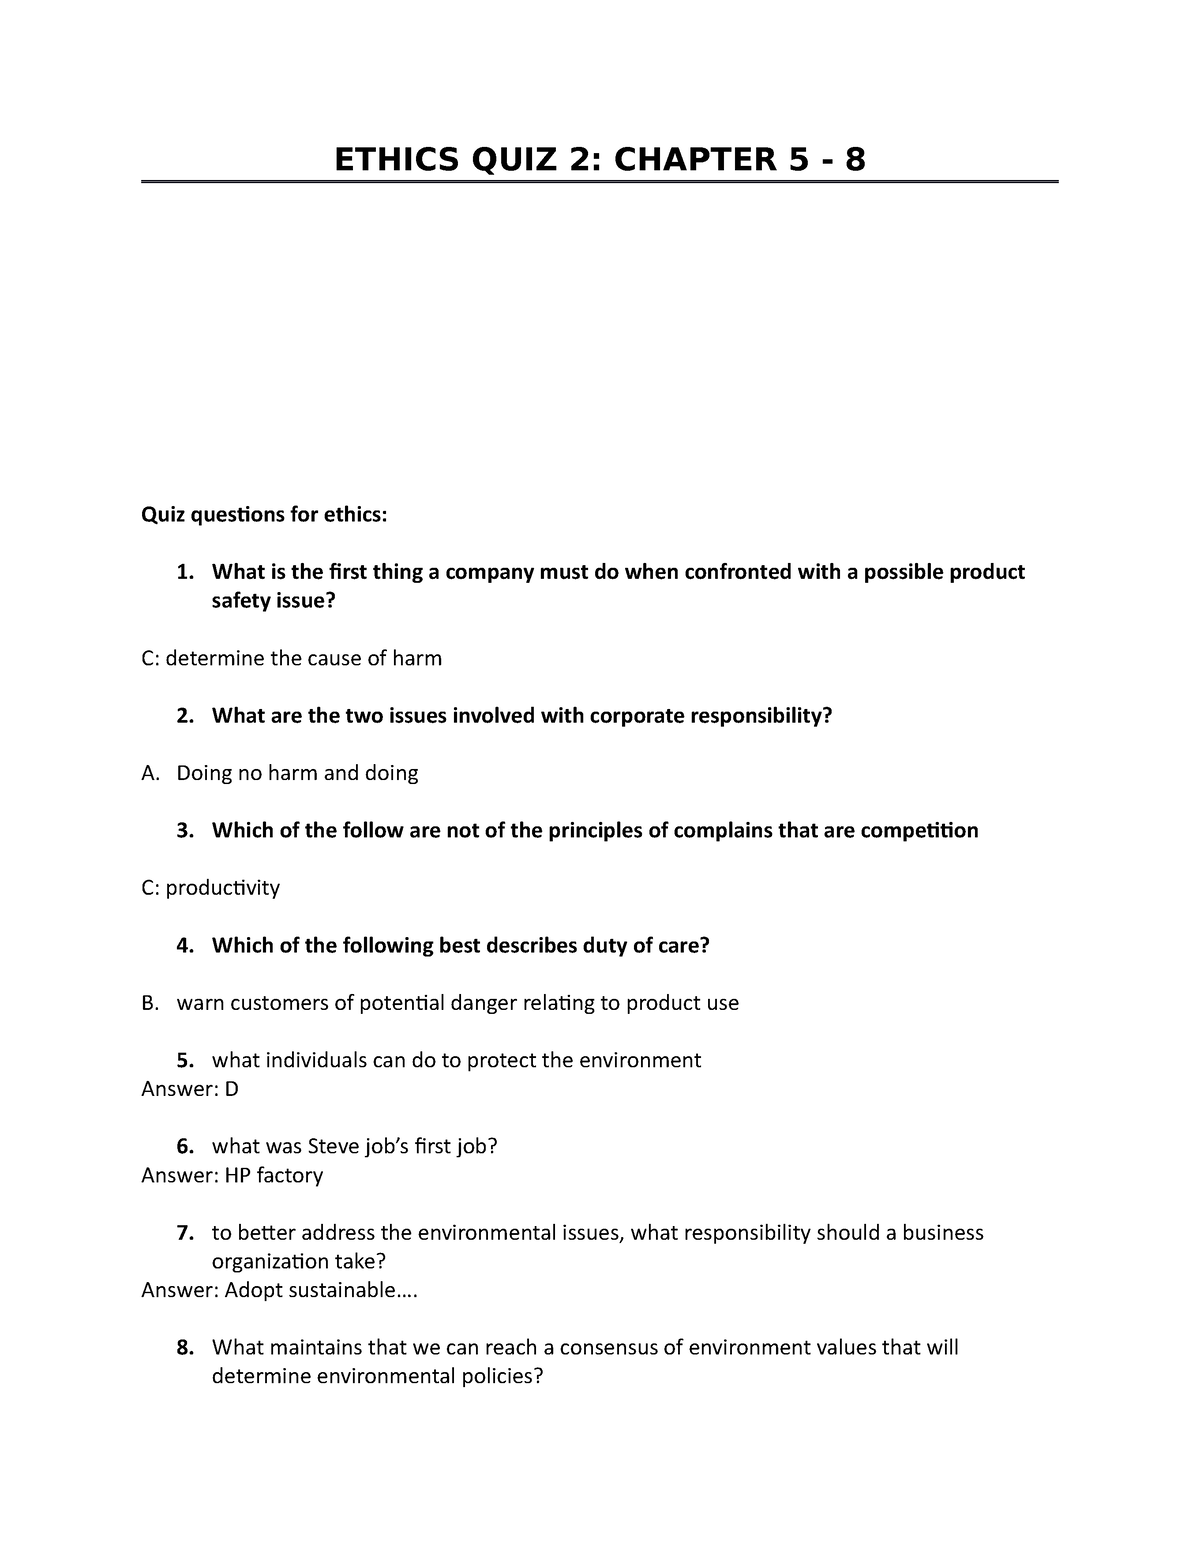 ethics essay questions and answers